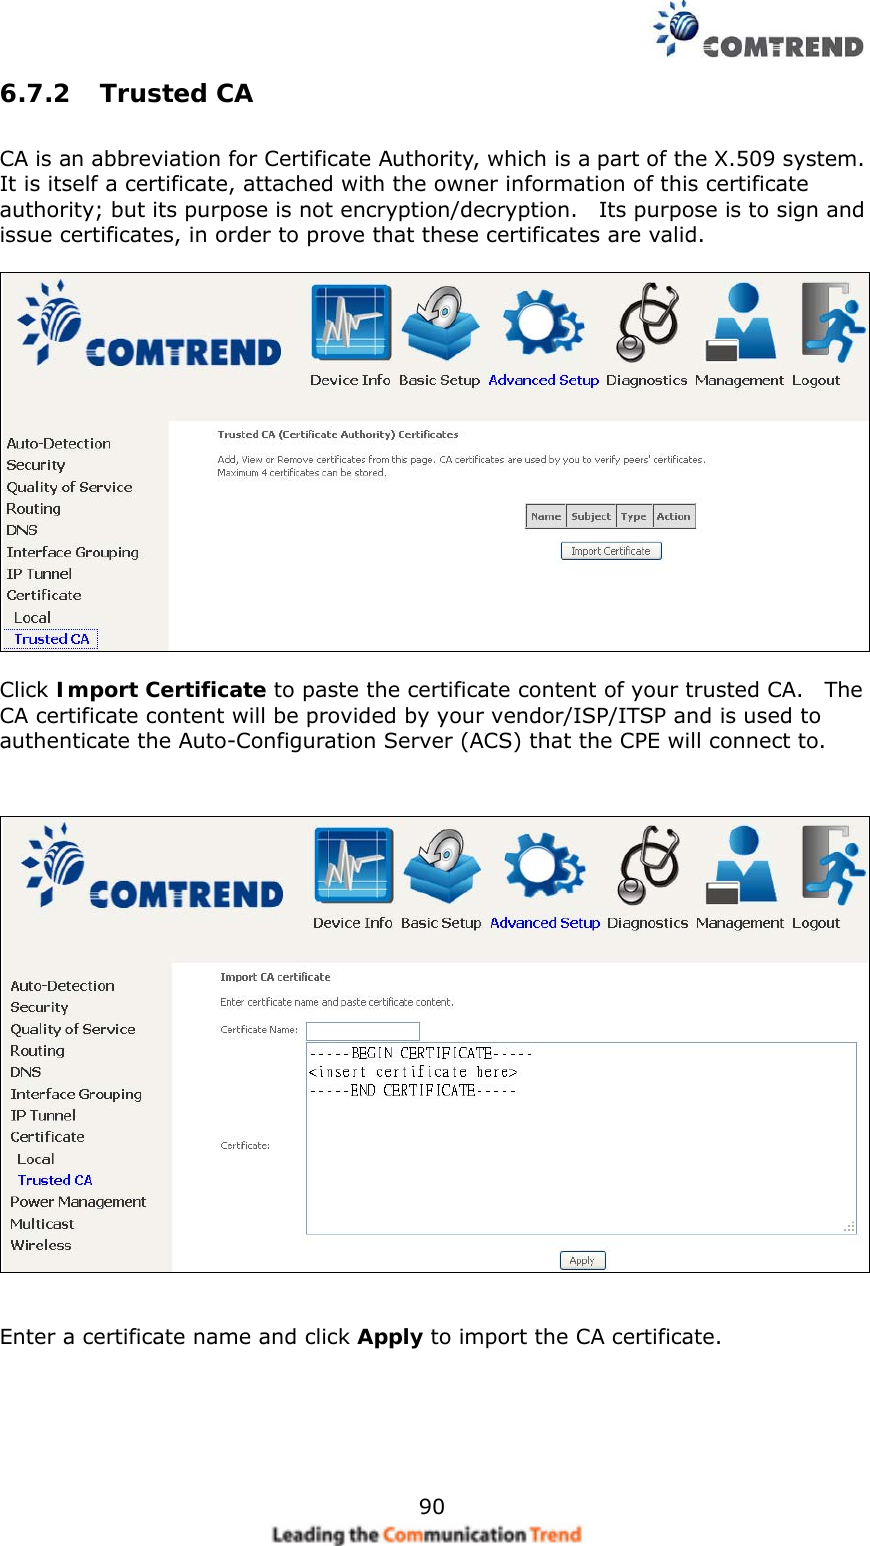    906.7.2 Trusted CA  CA is an abbreviation for Certificate Authority, which is a part of the X.509 system.   It is itself a certificate, attached with the owner information of this certificate authority; but its purpose is not encryption/decryption.    Its purpose is to sign and issue certificates, in order to prove that these certificates are valid.    Click Import Certificate to paste the certificate content of your trusted CA.    The CA certificate content will be provided by your vendor/ISP/ITSP and is used to authenticate the Auto-Configuration Server (ACS) that the CPE will connect to.      Enter a certificate name and click Apply to import the CA certificate. 